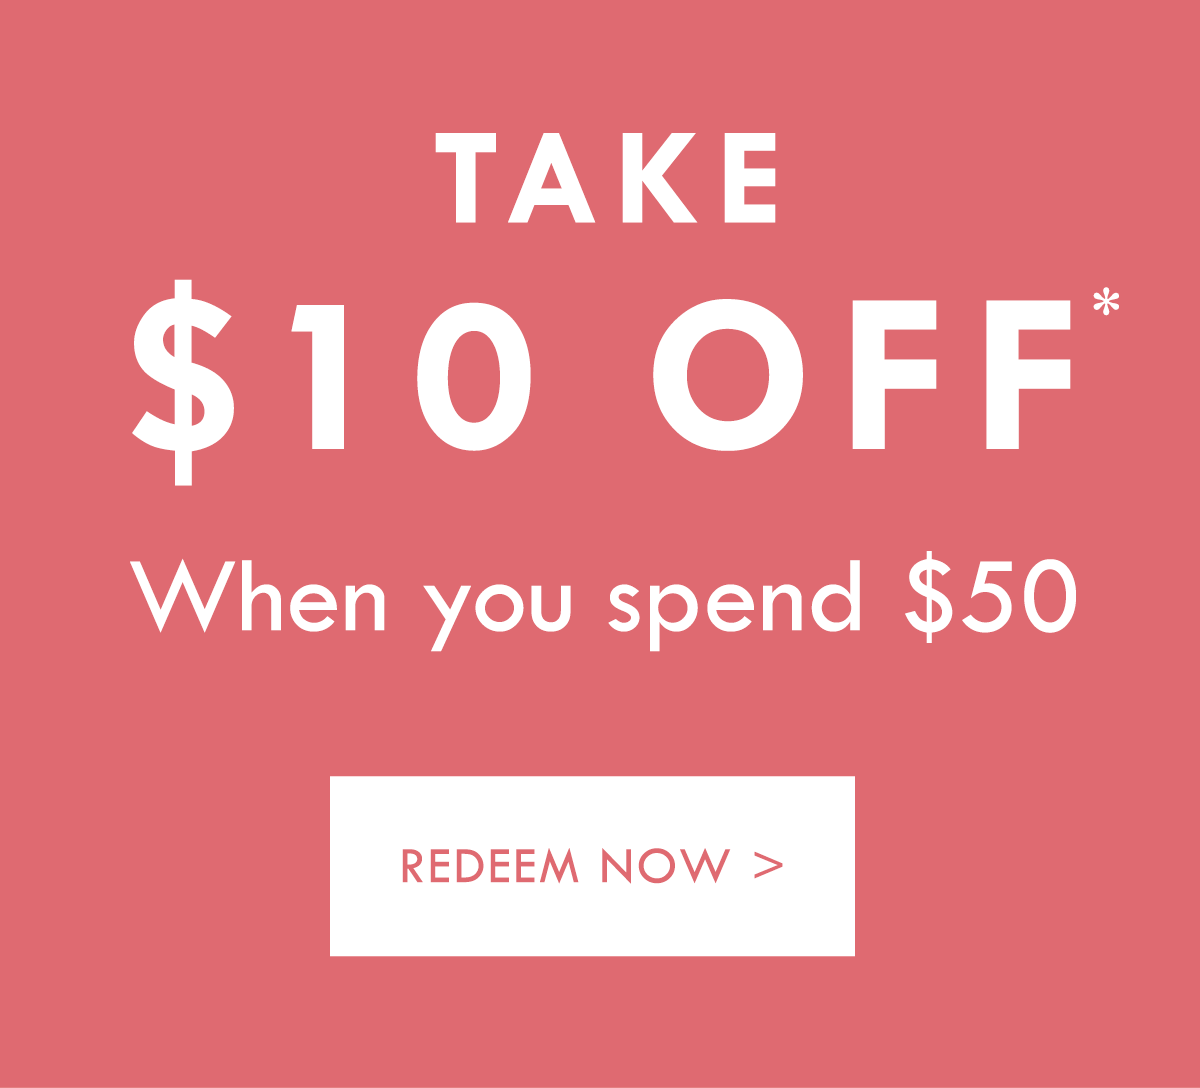 Take $10 off* When you spend $50. Redeem Now.